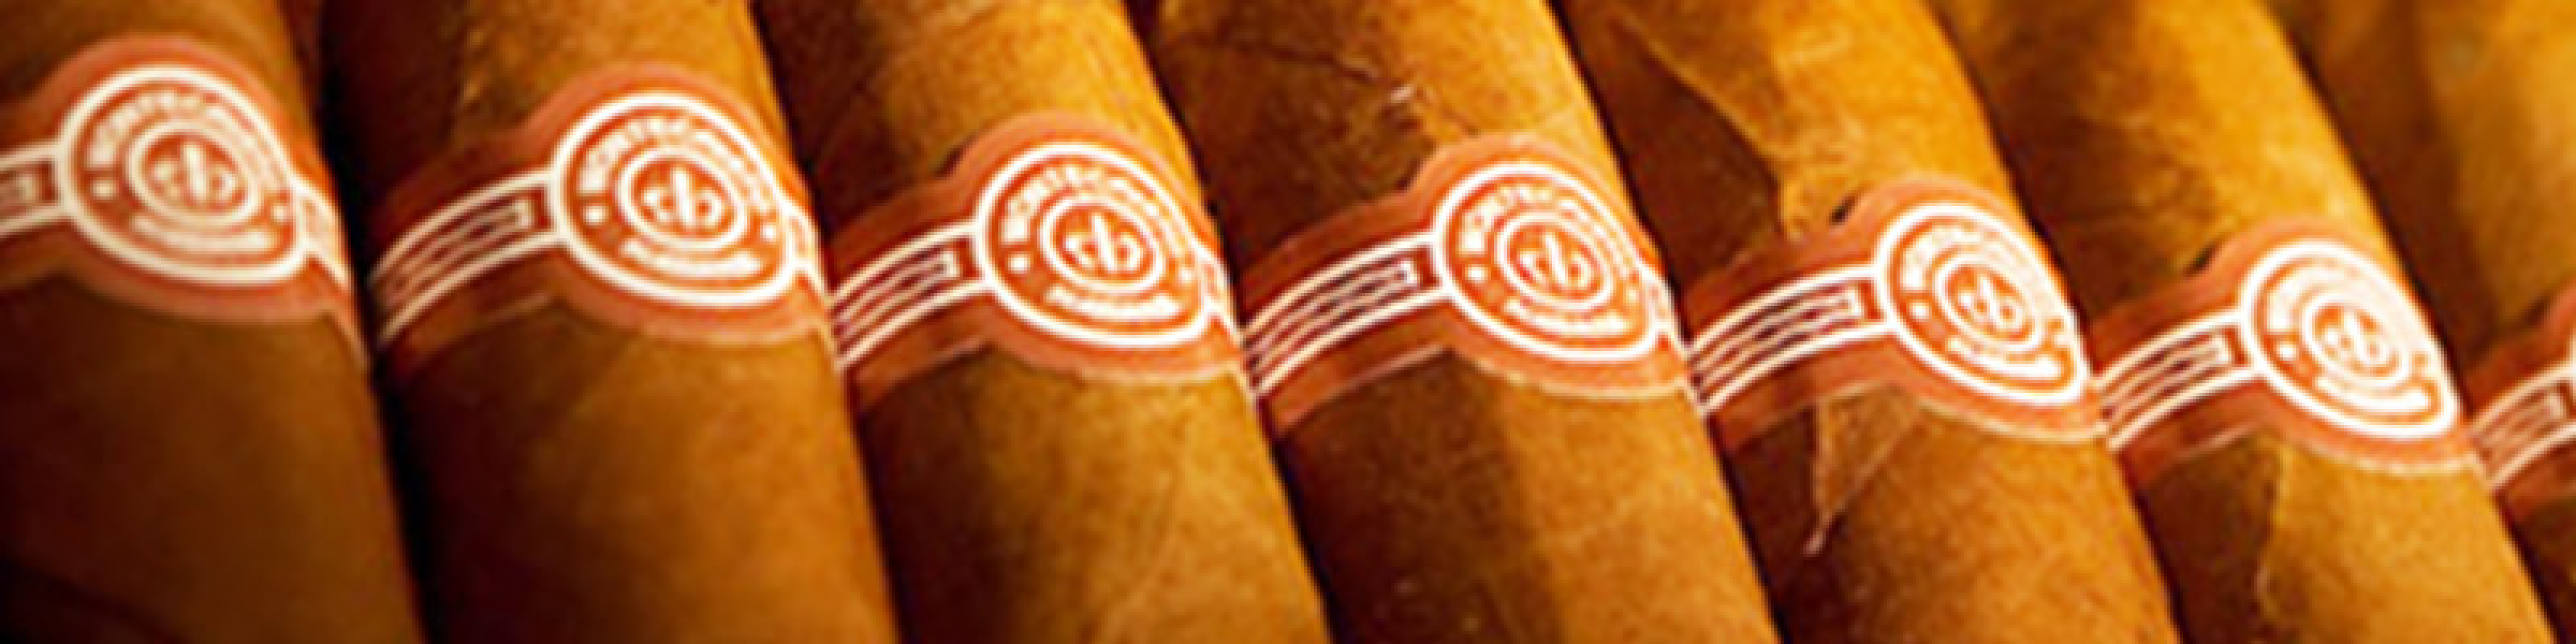 MONTECRISTO IS PART OF THE OLDER BRANDS OF CUBAN CIGARS